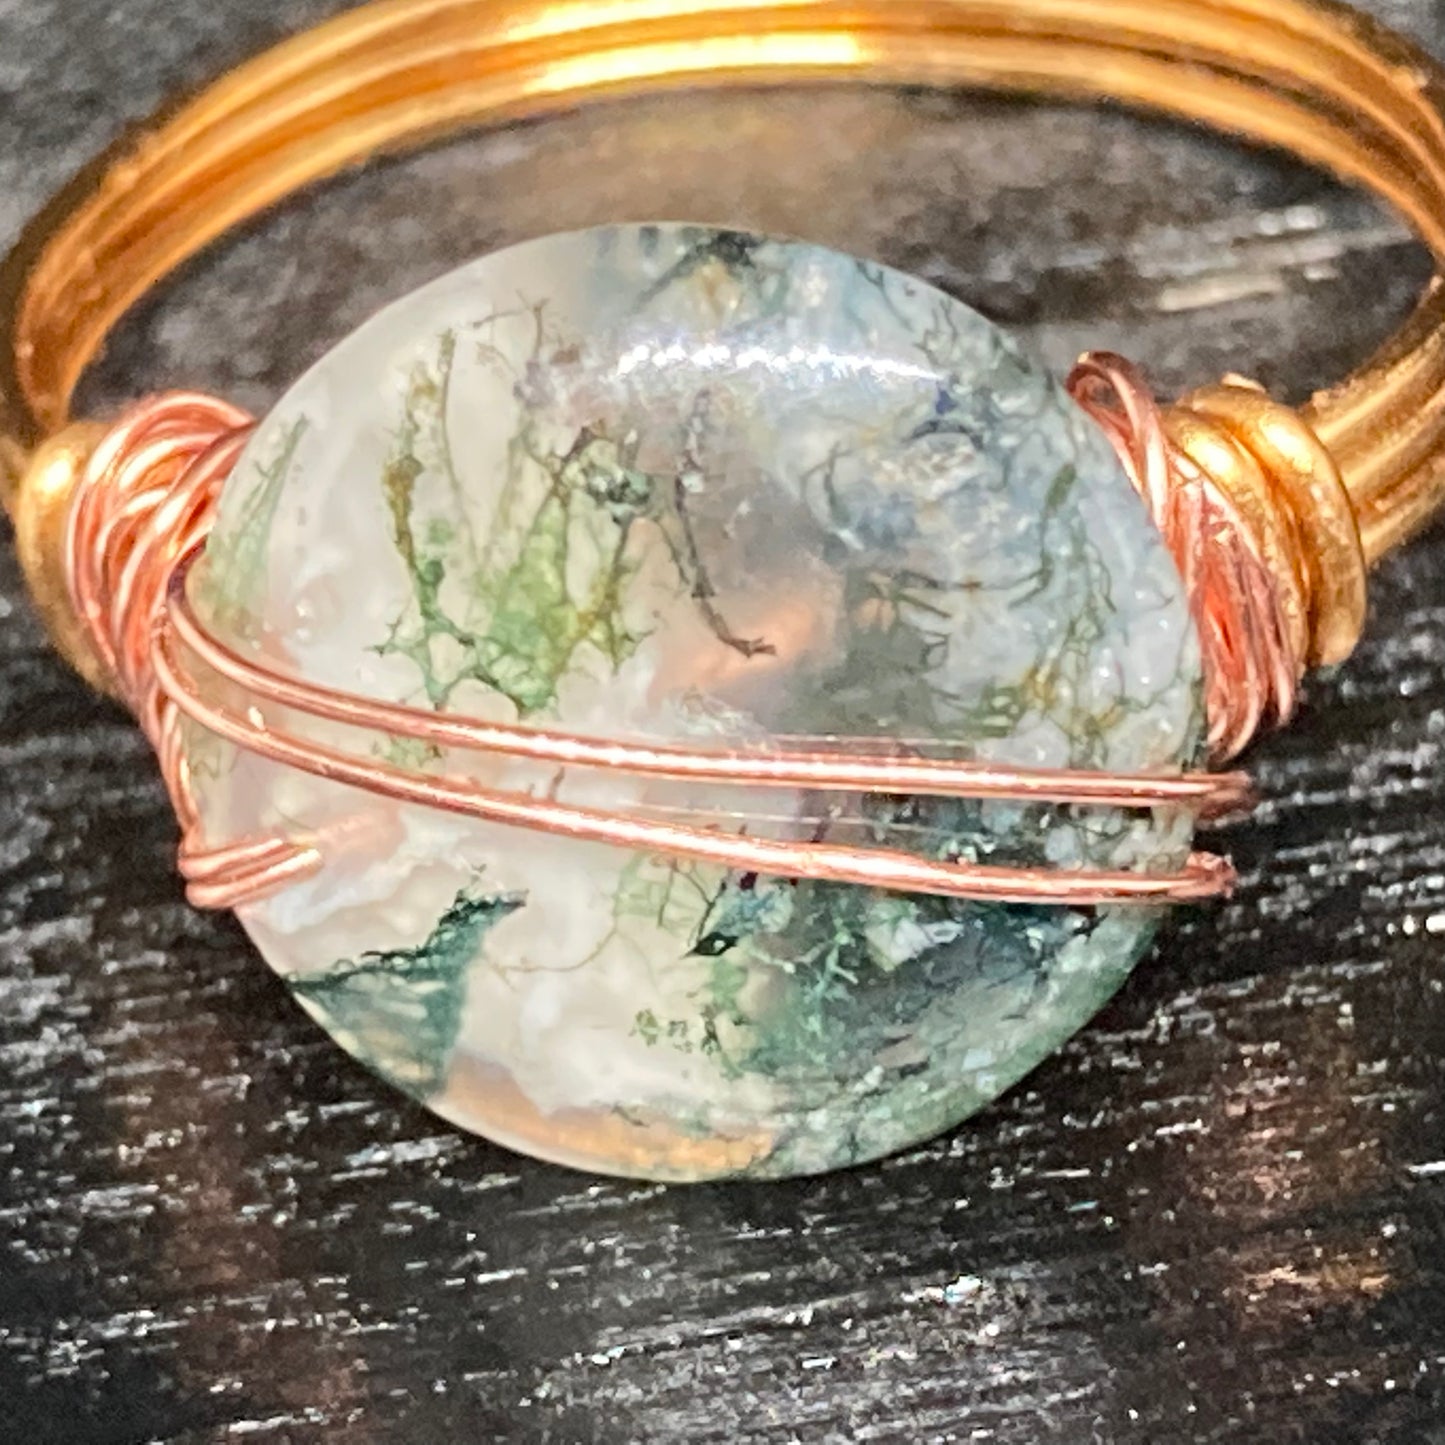 Moss Agate Disc Ring